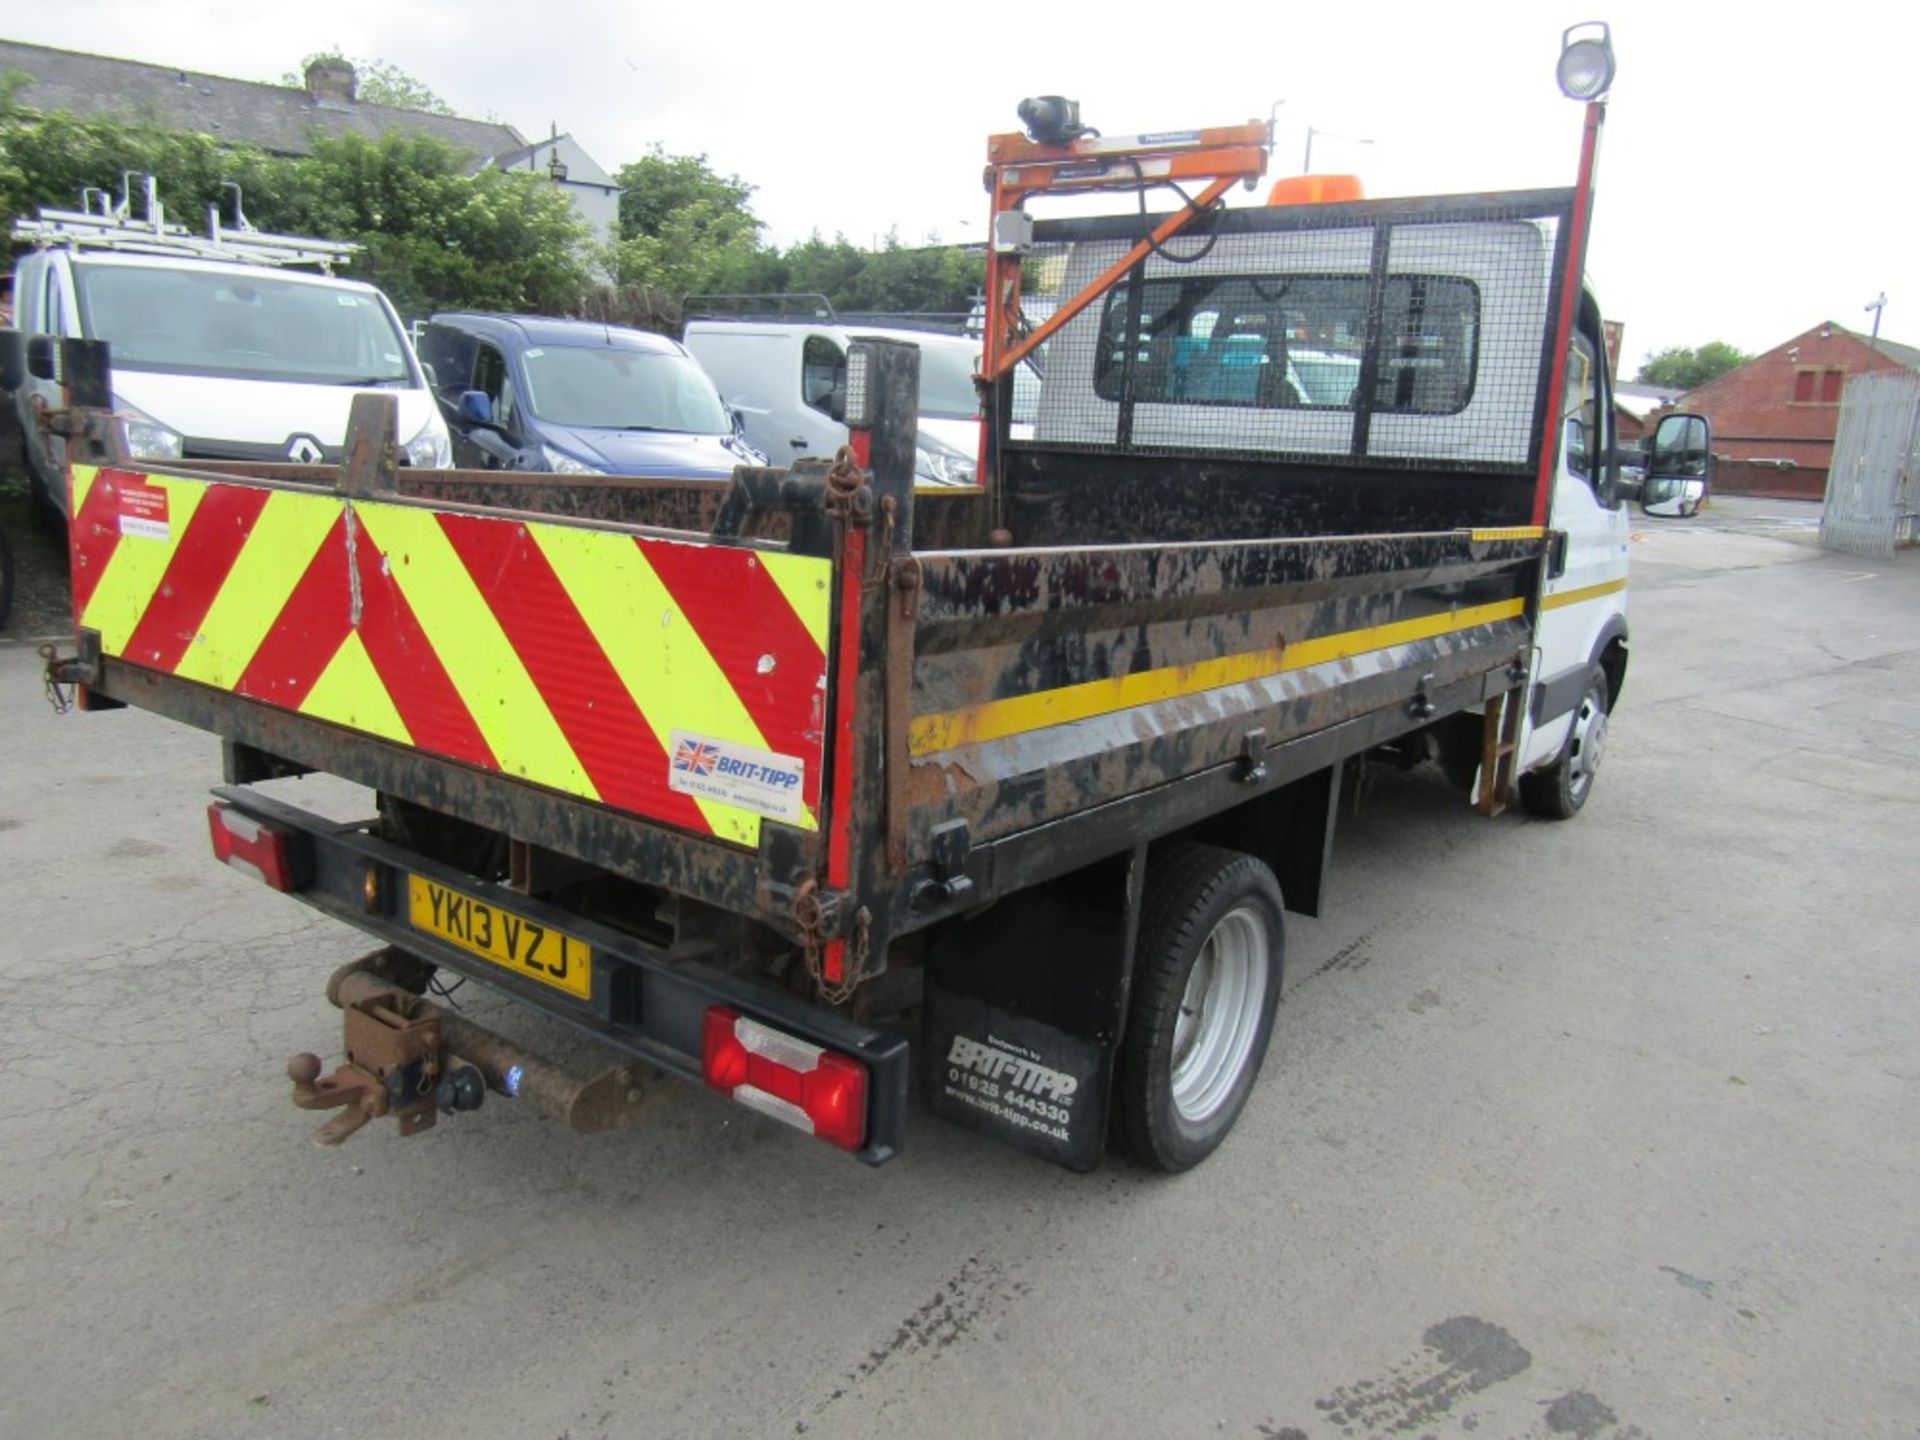 13 reg IVECO DAILY 35C11 TIPPER, 1ST REG 03/13, TEST 02/23, MILEAGE UNKNOWN, V5 HERE, 1 OWNER FROM - Image 4 of 5